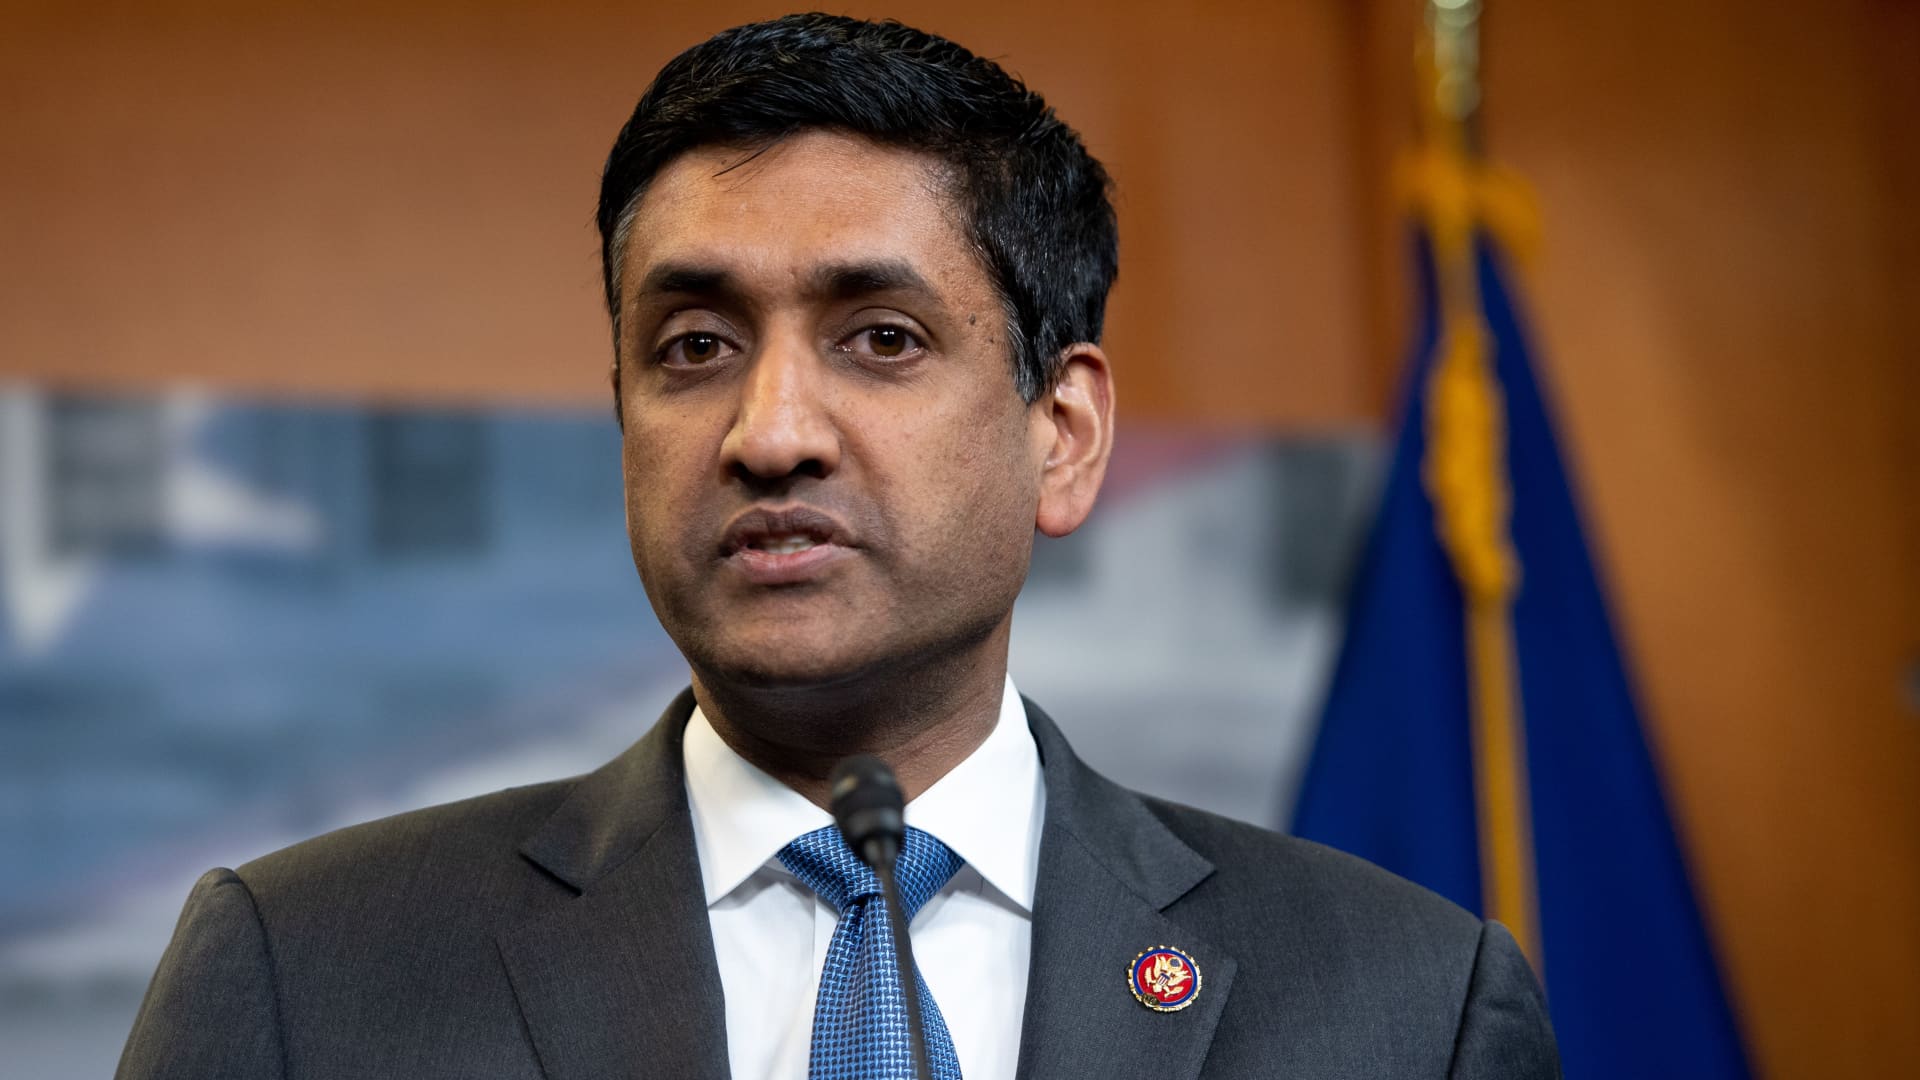 Twitter will have a 'hard time' keeping Trump off if he runs in 2024, says Rep. Khanna